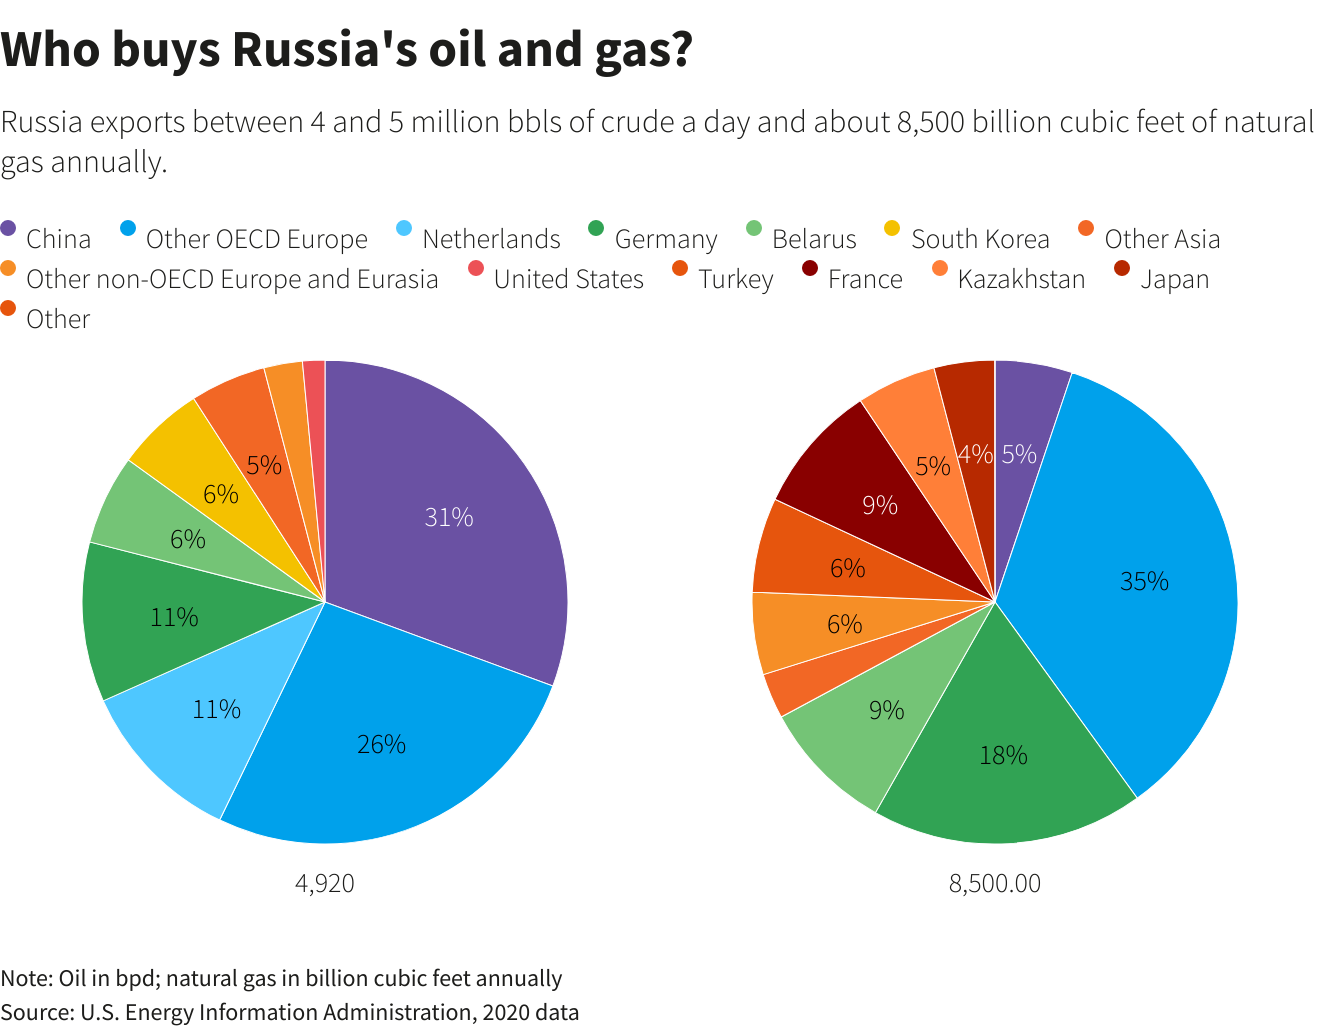 Who buys Russia's oil and gas? Who buys Russia's oil and gas?